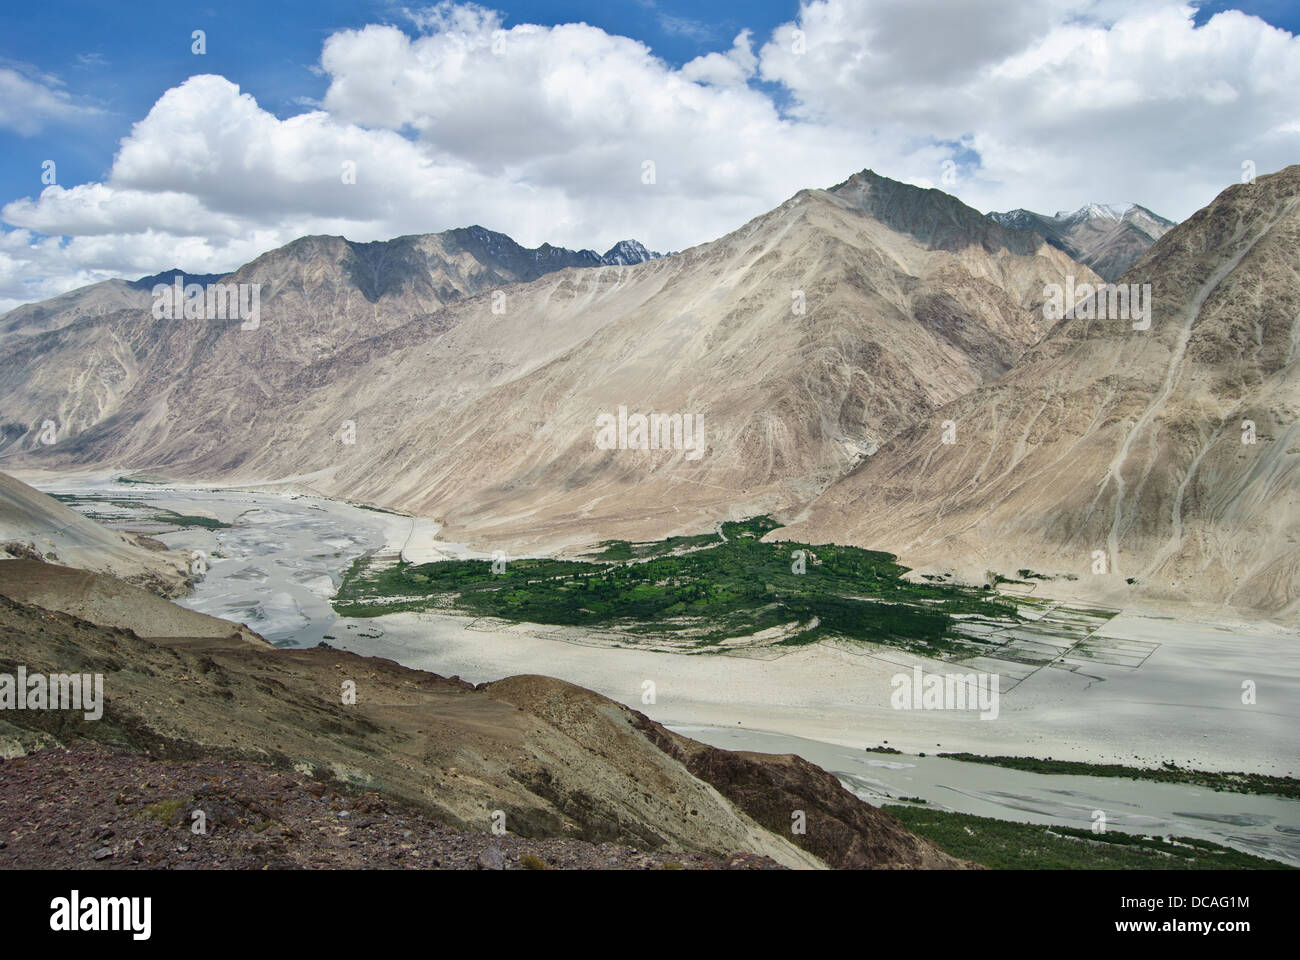 Nubra valley and its oasis village. Stock Photo